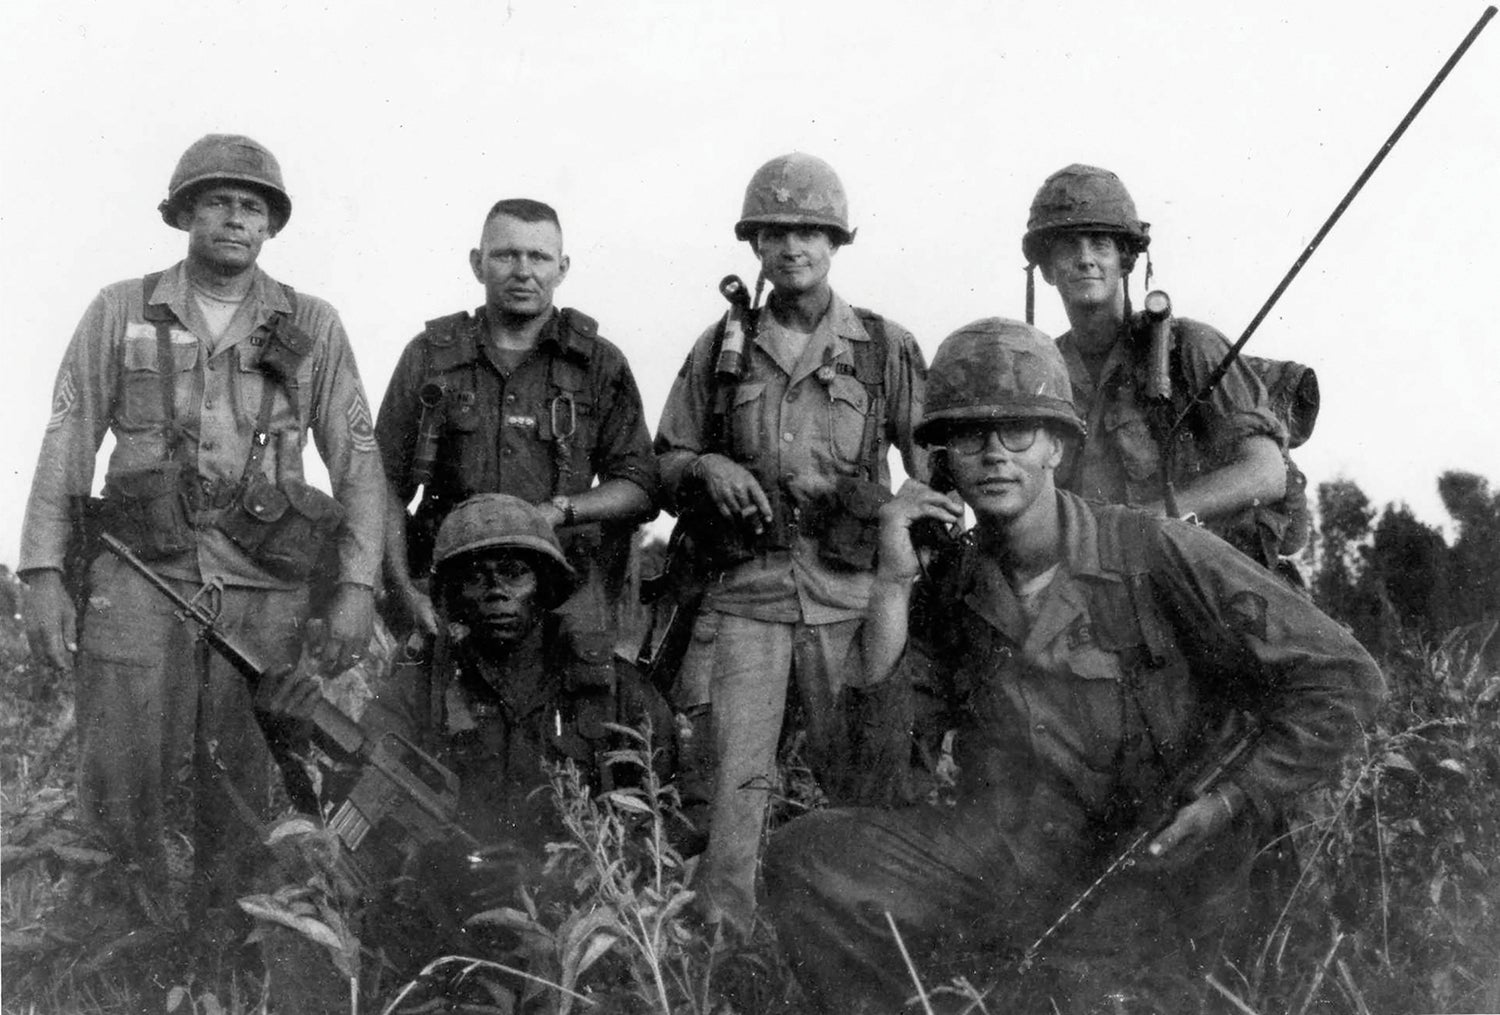 Then-Lt. Col. Hal Moore, standing third from left, poses for a photo with members of the 1st Battalion, 7th Cavalry Regiment, command team before the Battle of Ia Drang, Vietnam. (Credit: Courtesy photo)